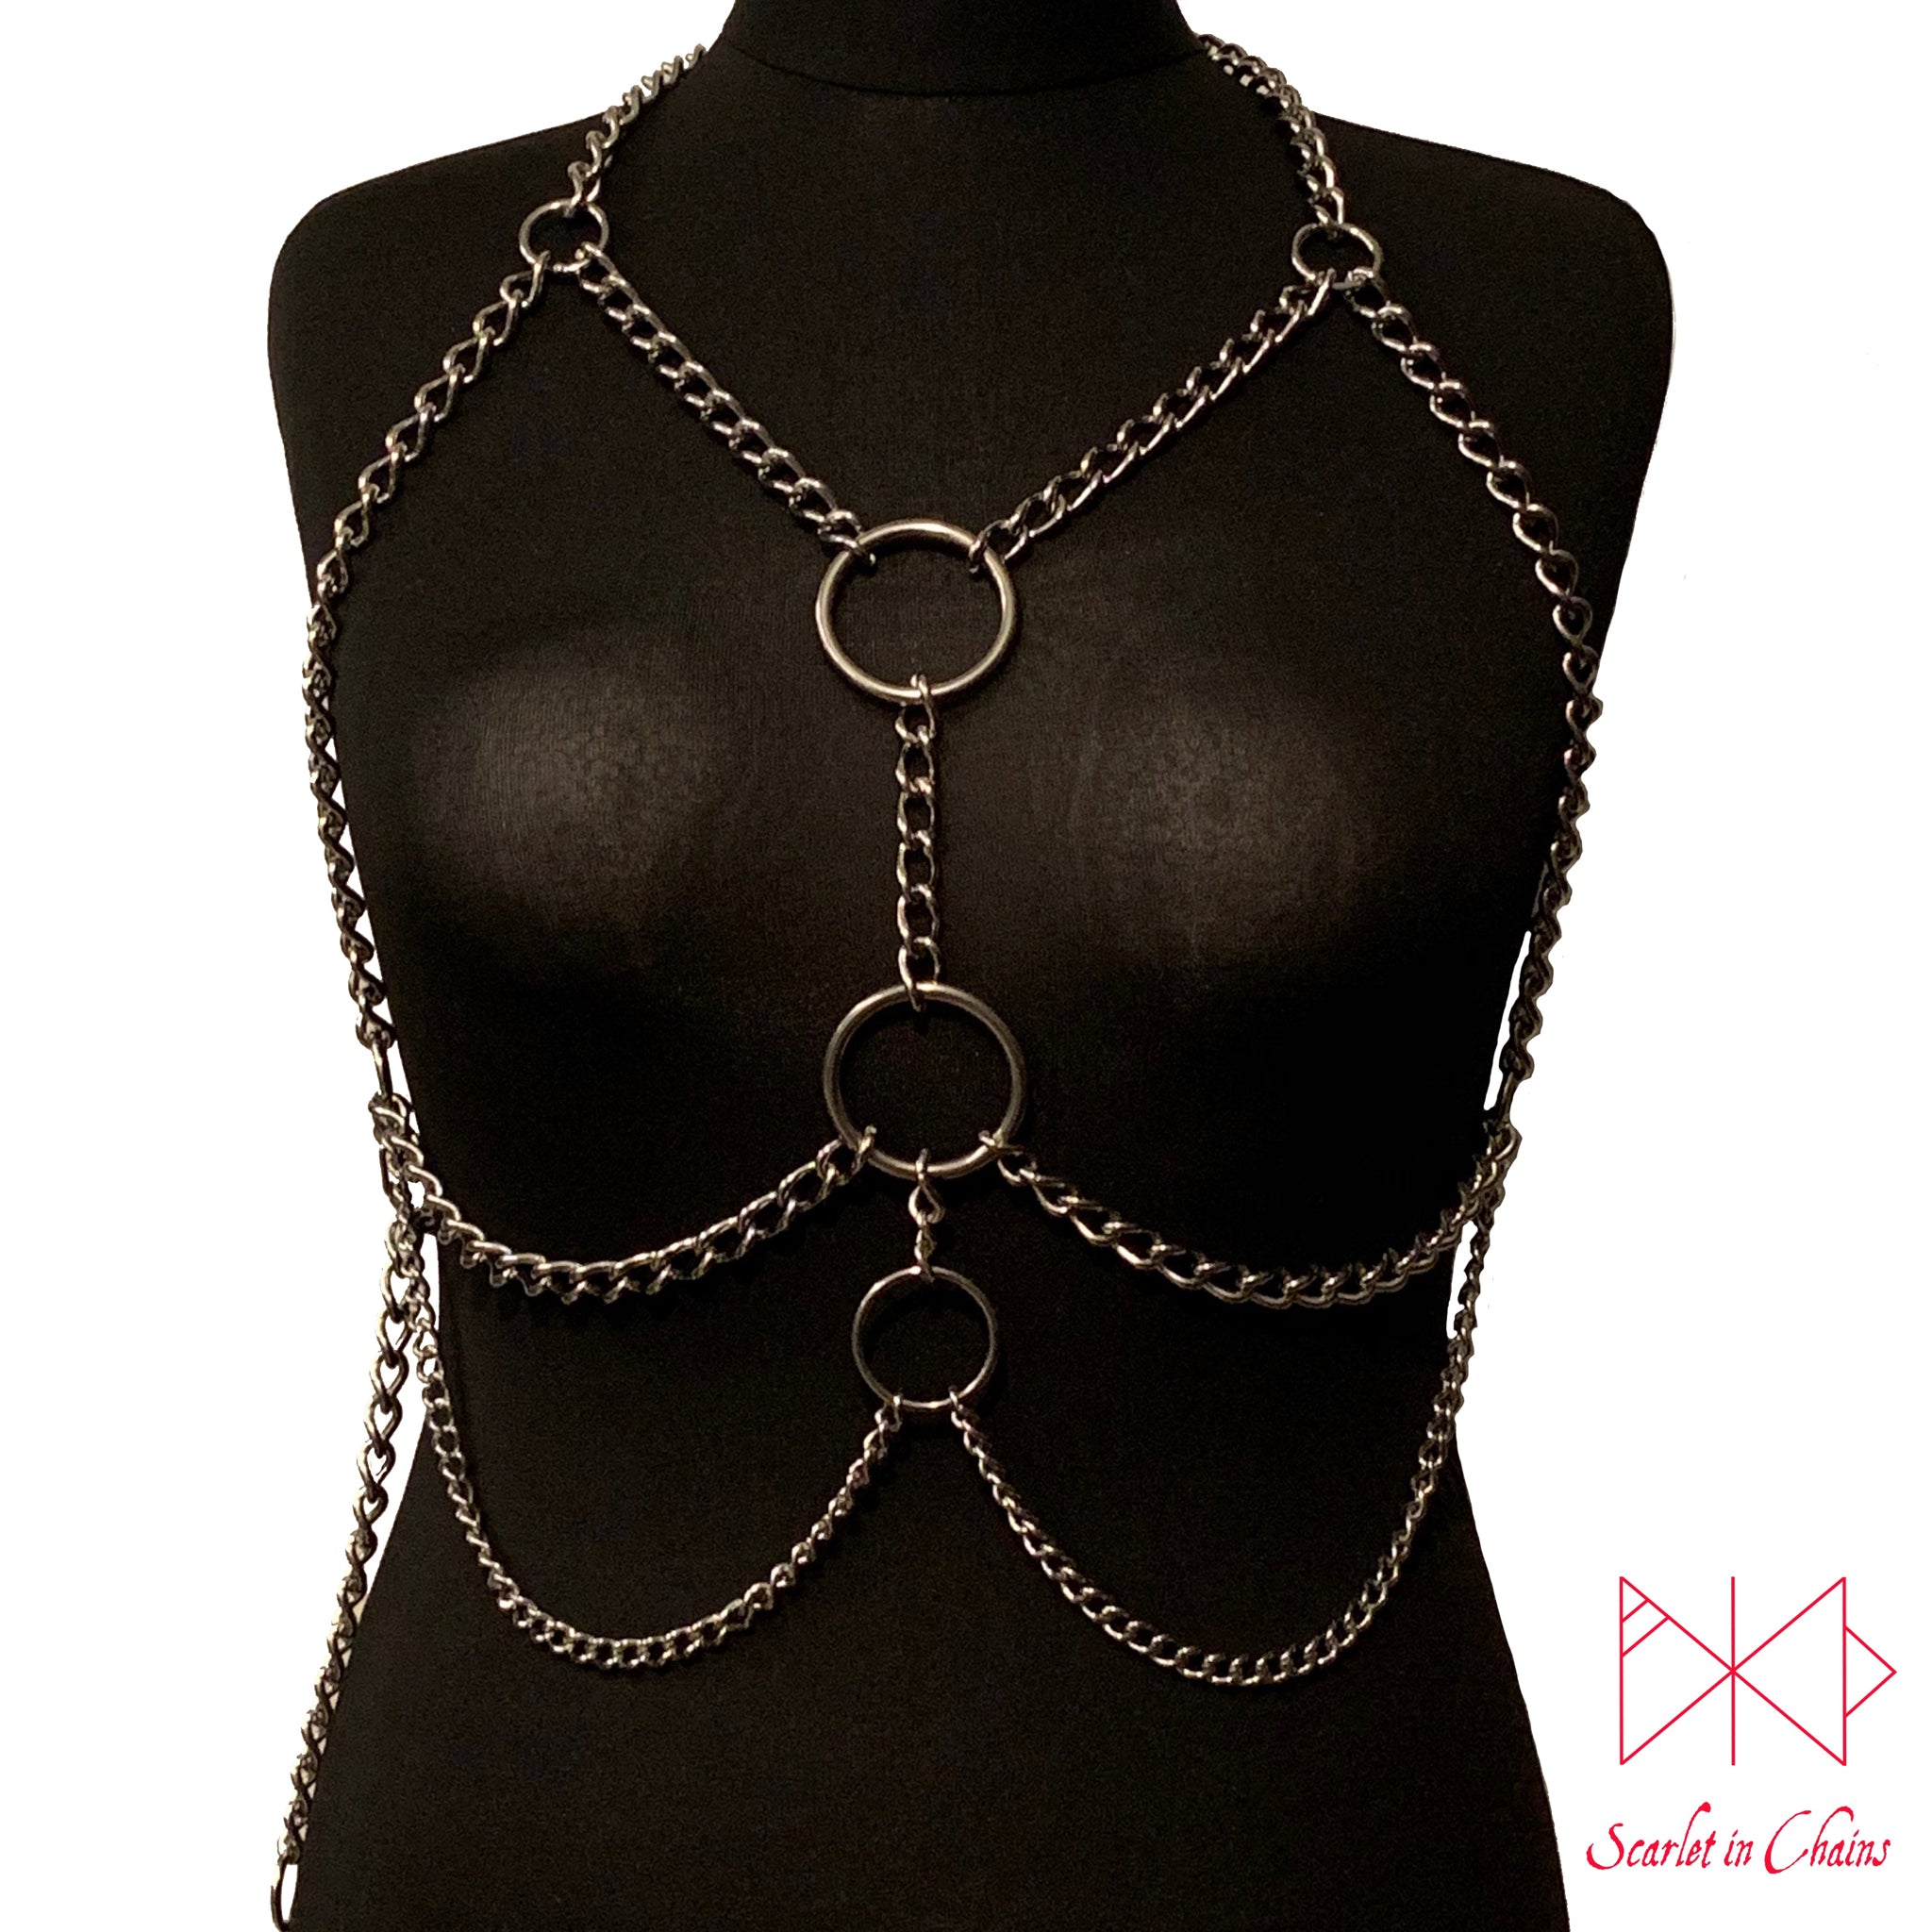 Stainless Steel Artemis body harness made from 304 Stainless Steel with 316 Stainless Steel Rings Shown Front view